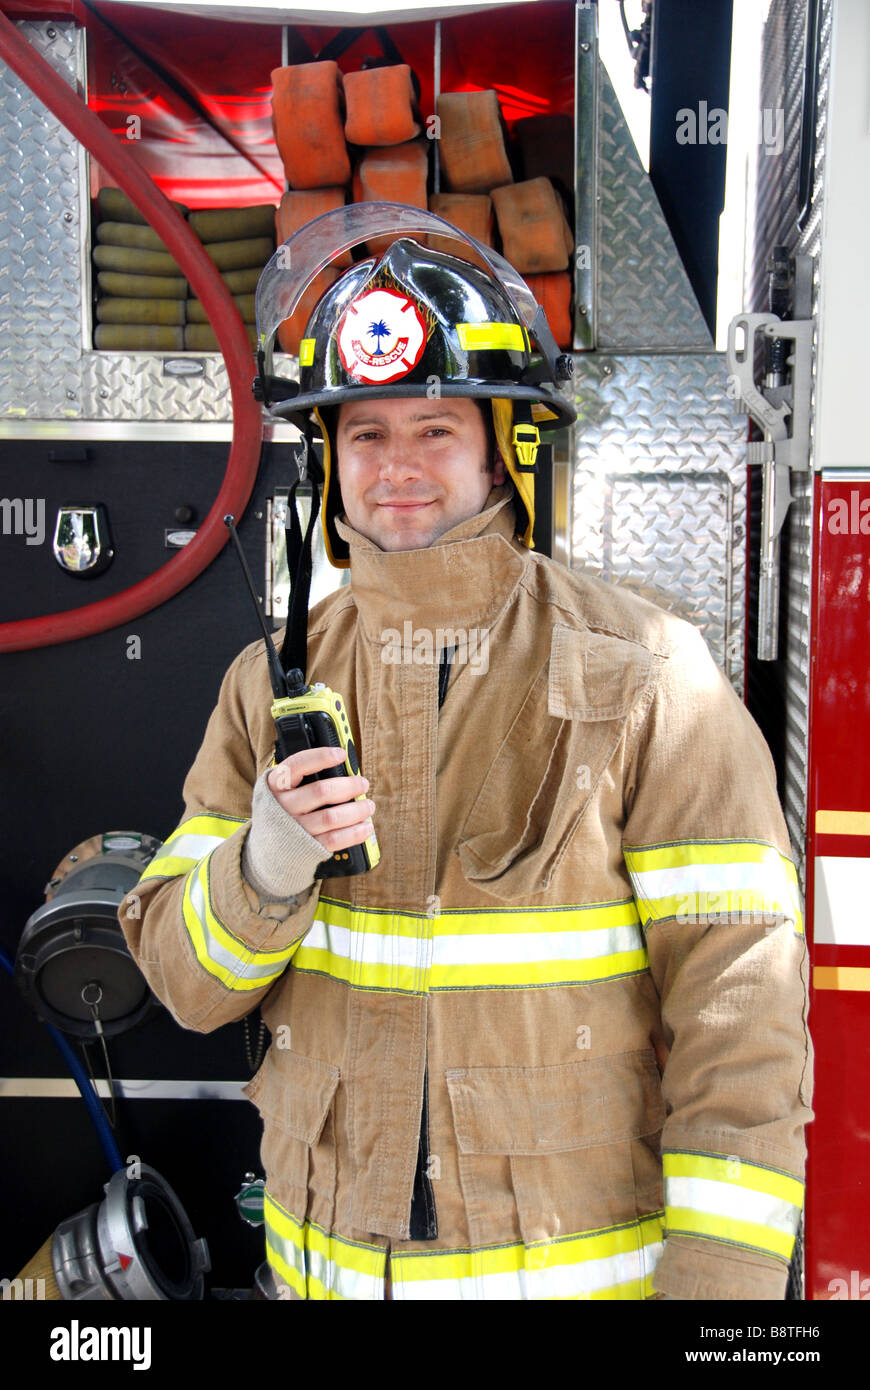 Smiling Male Firefighter holding radio in front of fire truck wearing bunker gear and helmet Stock Photo